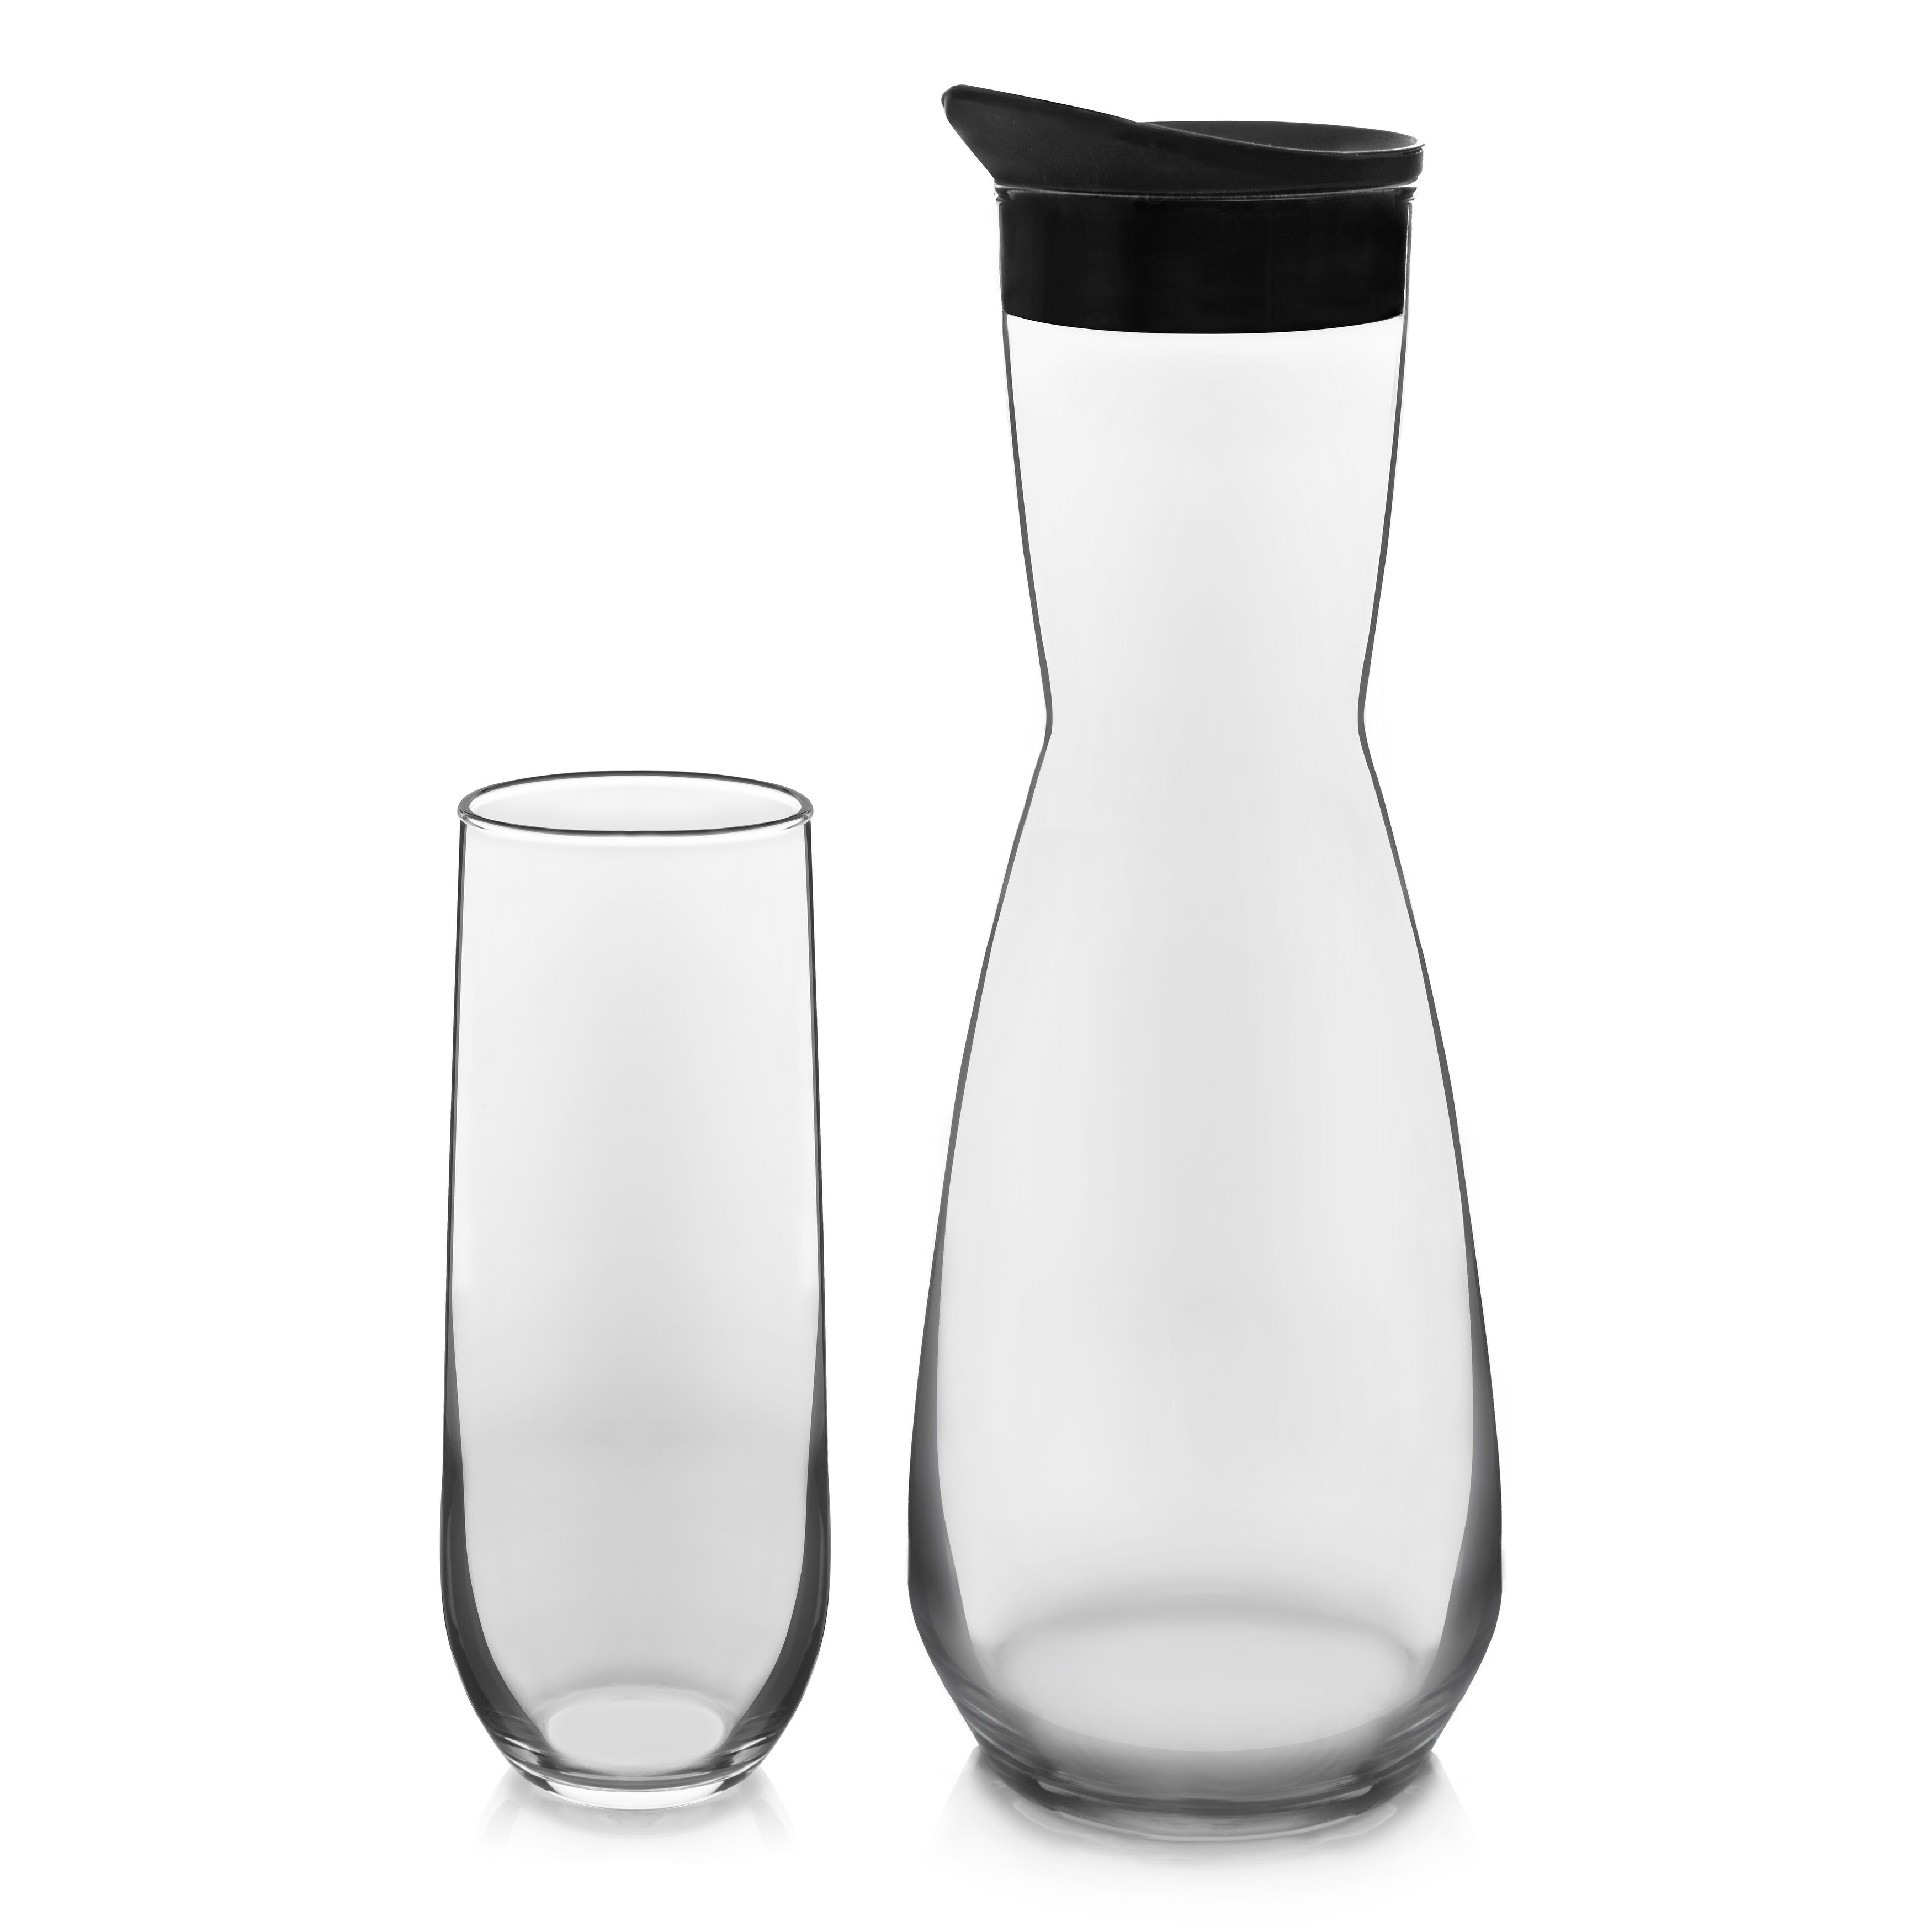 Libbey Modern Bar Mimosa Entertaining Set with 4 Stemless